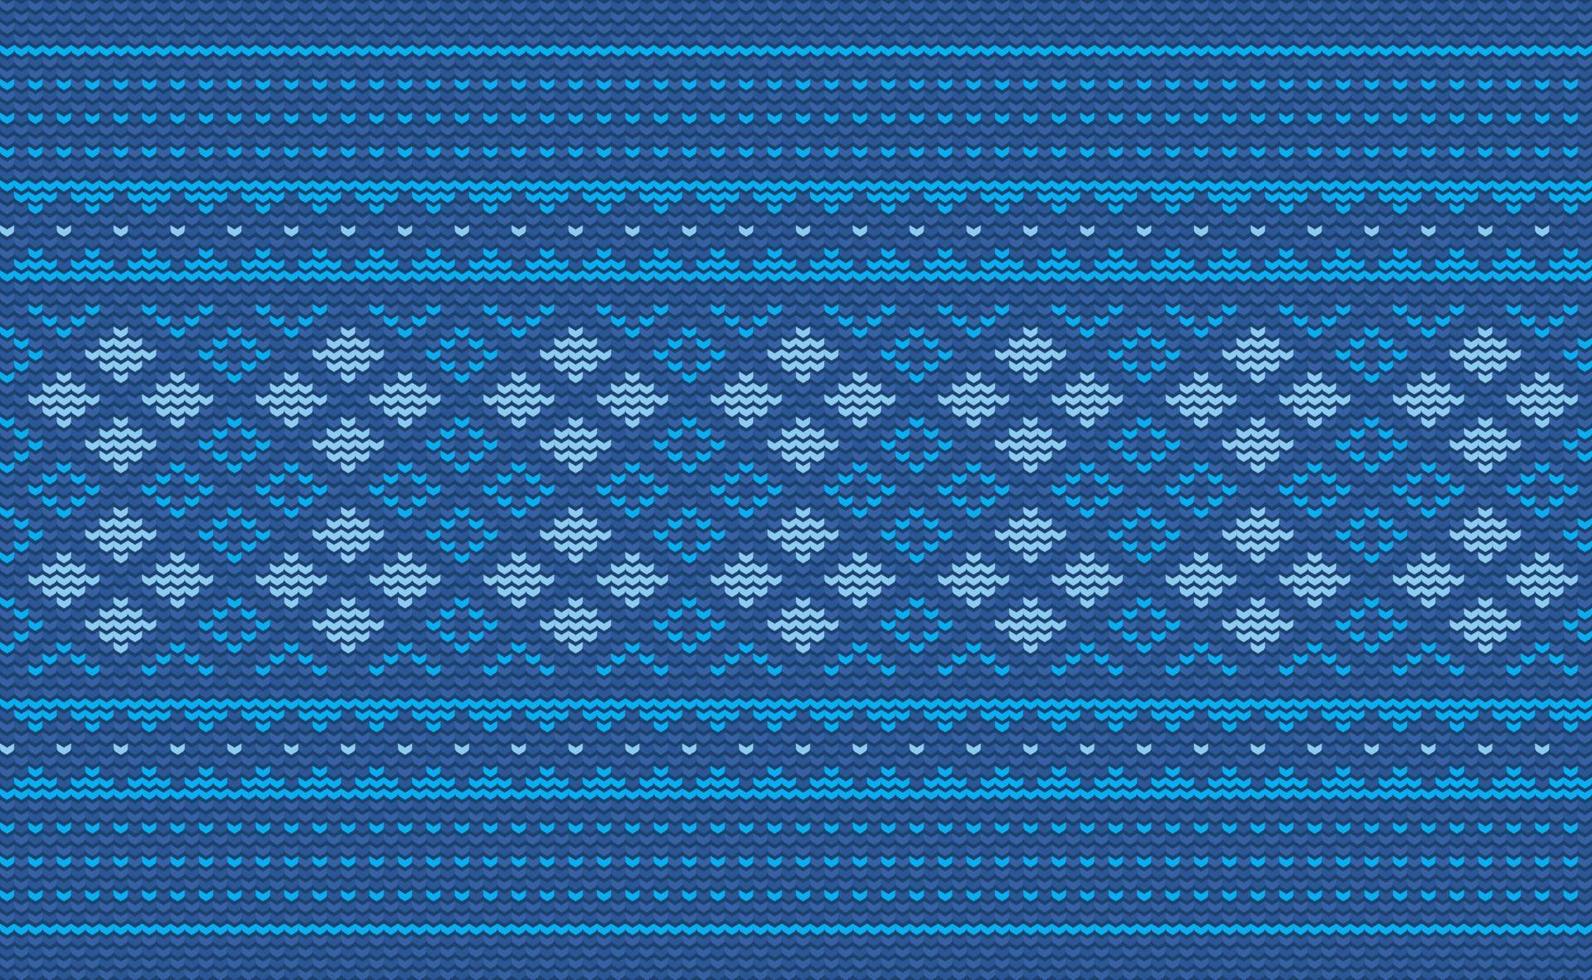 Crochet pattern, Vector cross stitch knitting background, Knitted ethnic decorative square style